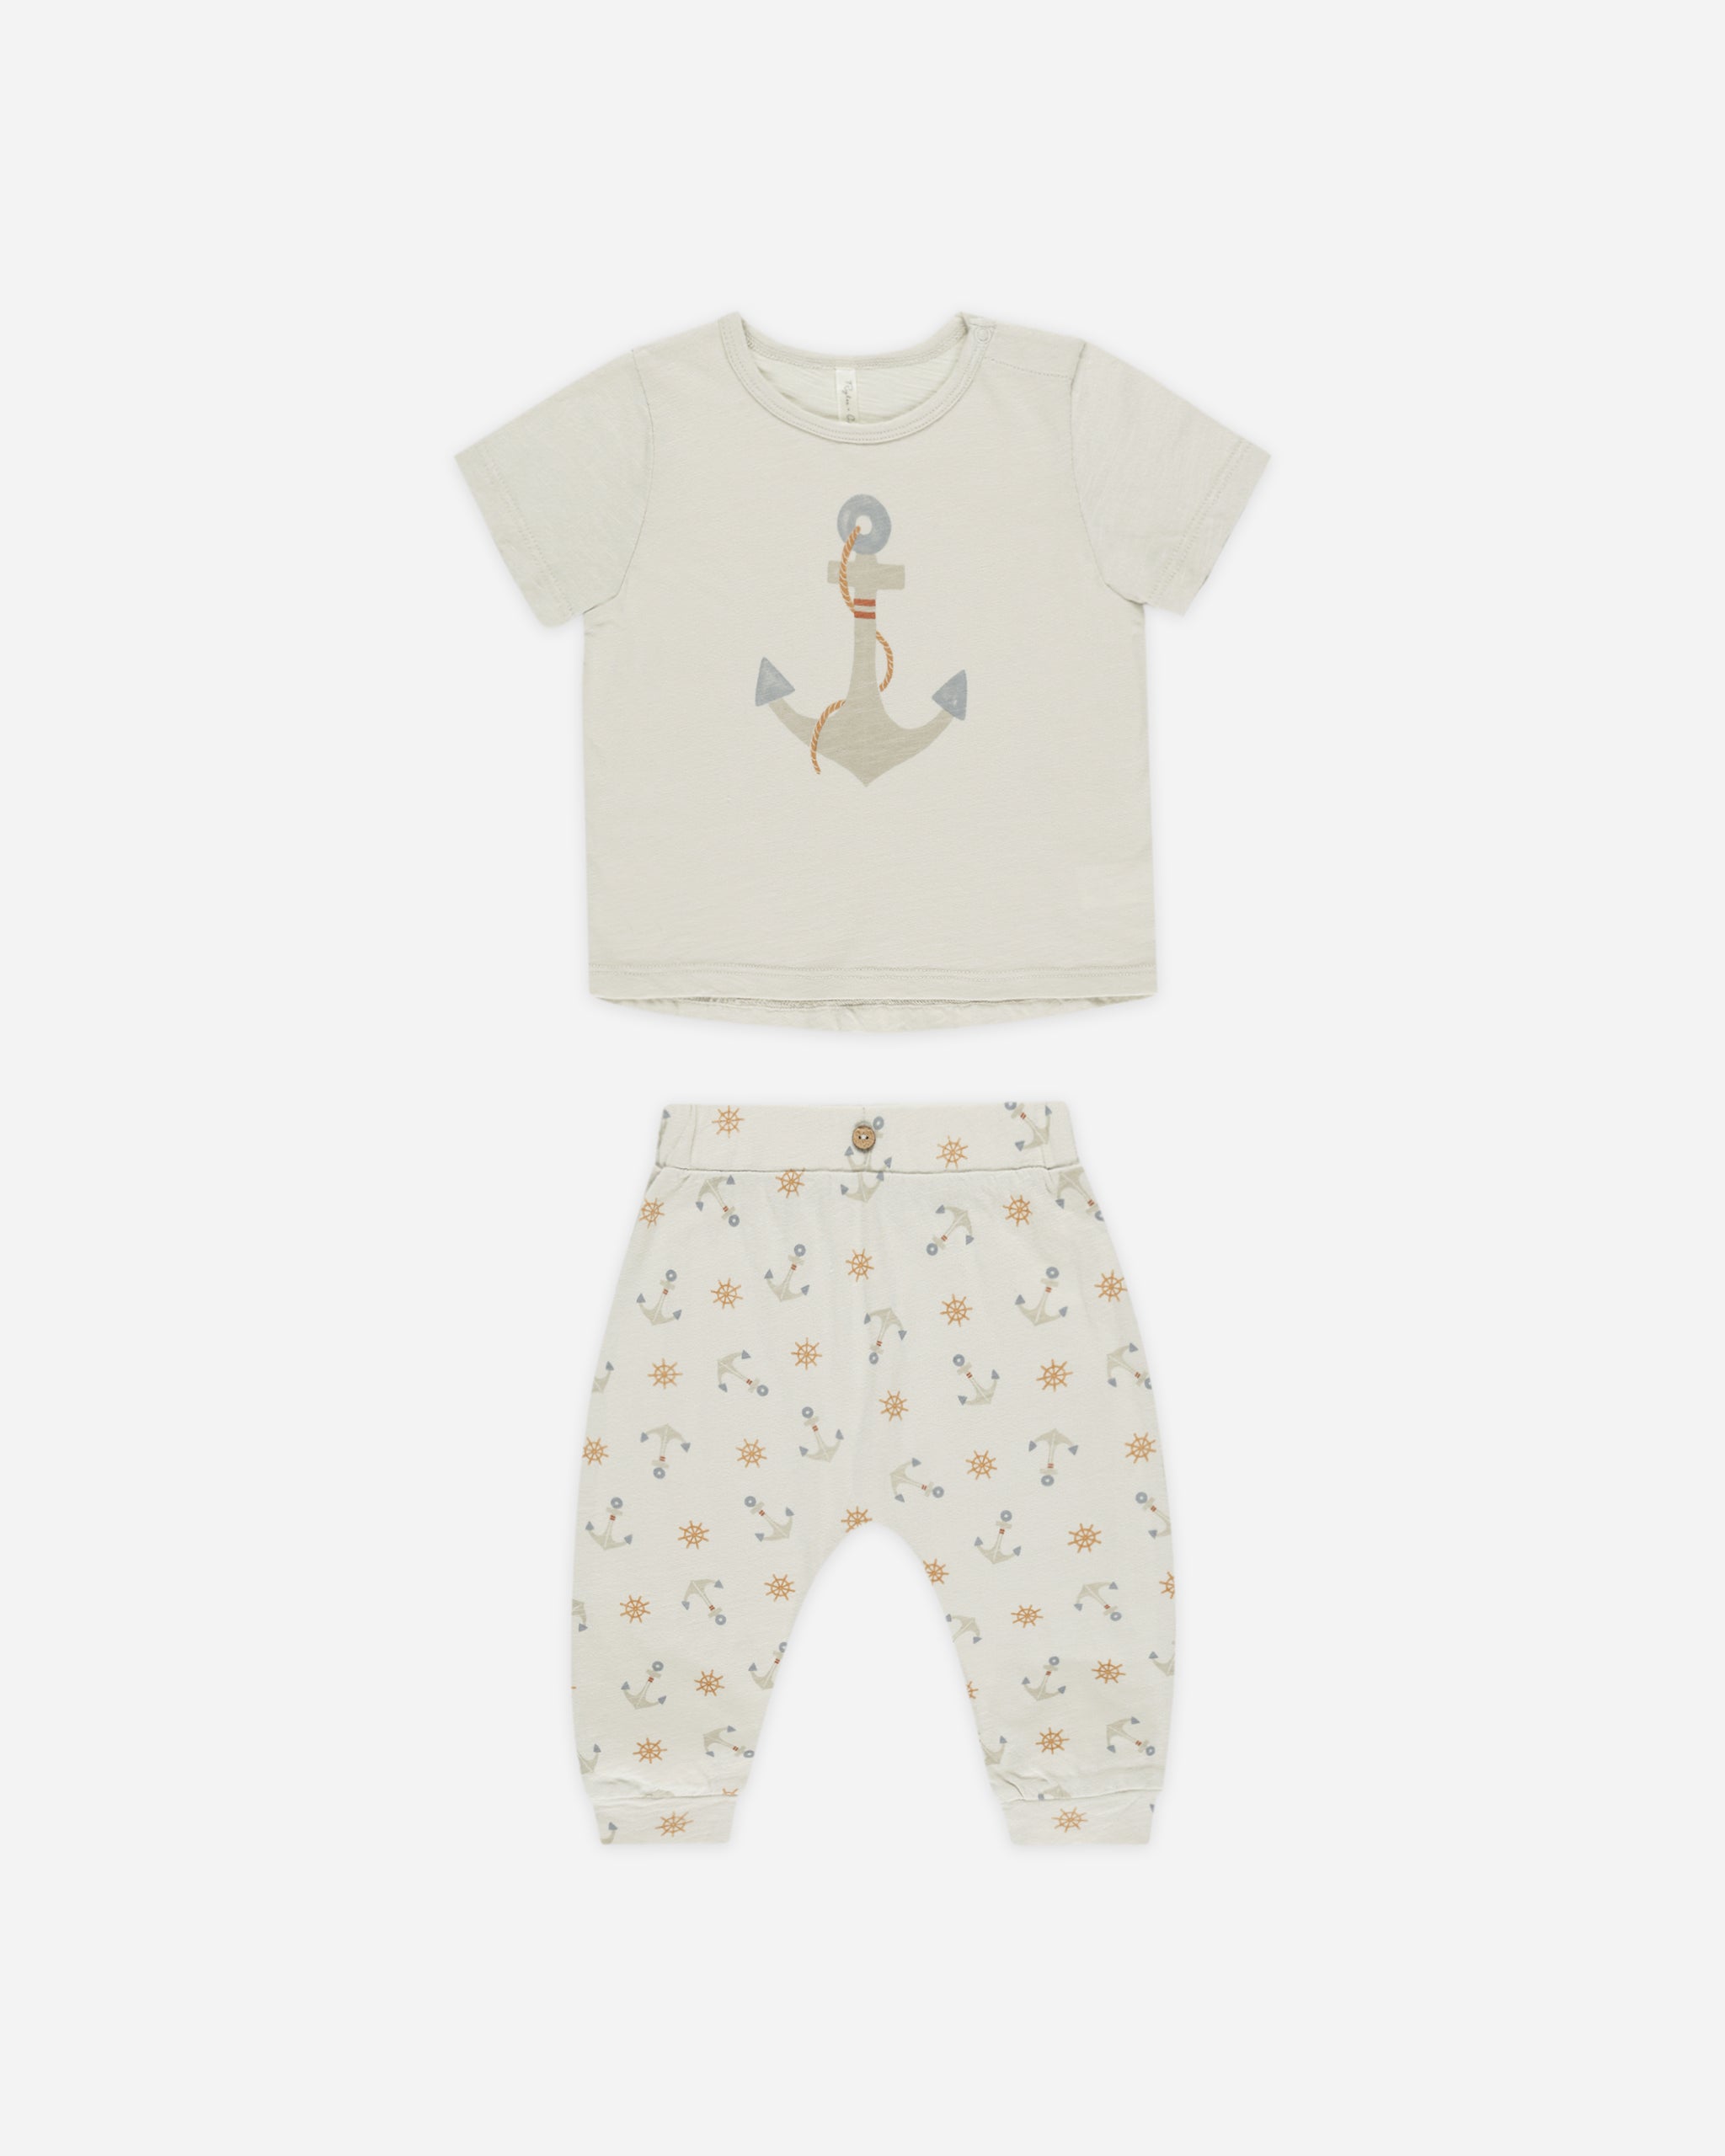 Tee + Slouch Pant Set || Anchors - Rylee + Cru | Kids Clothes | Trendy Baby Clothes | Modern Infant Outfits |